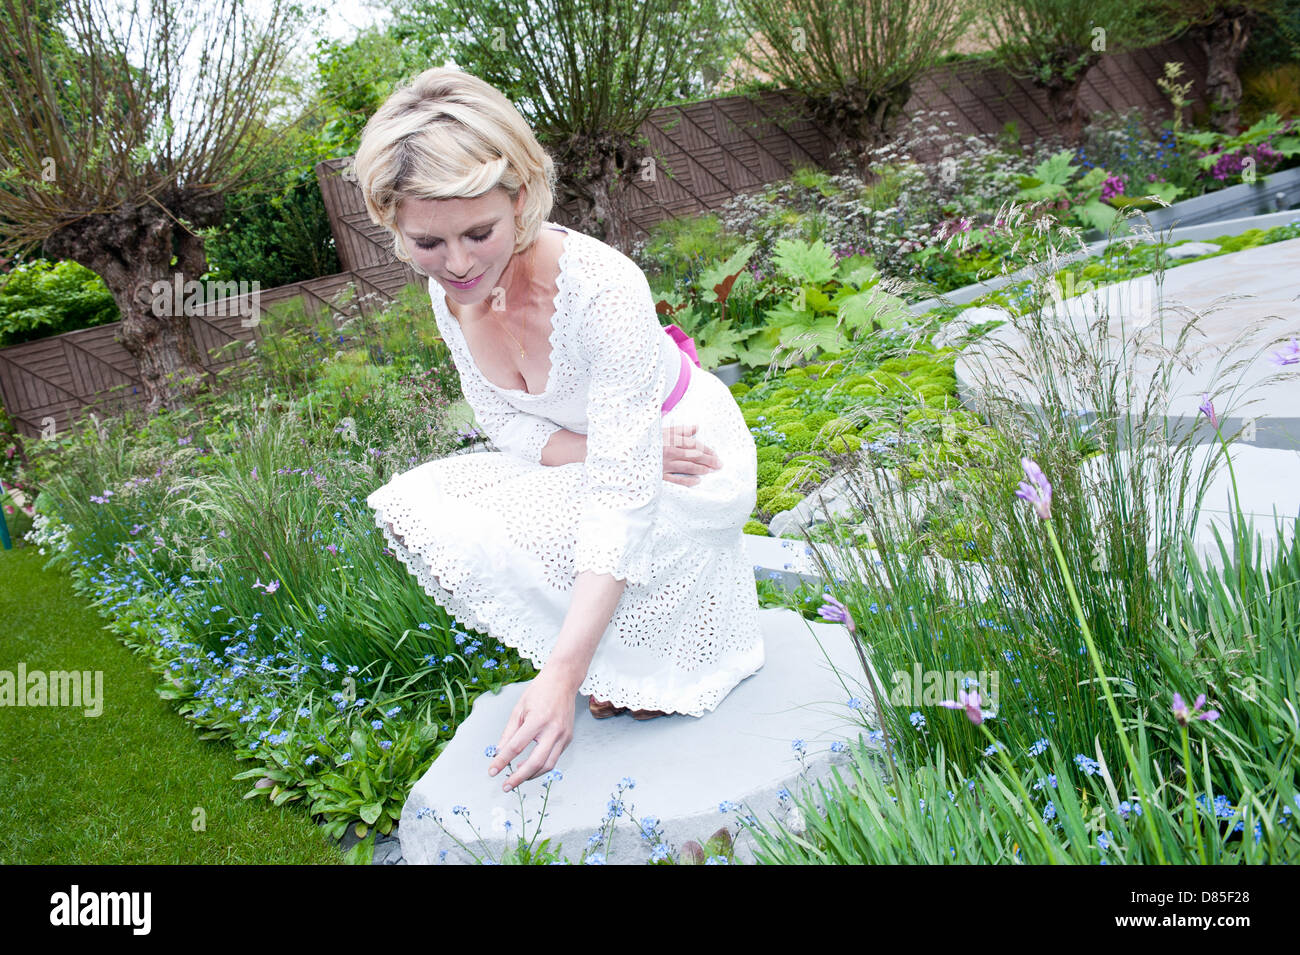 London, UK - 20 May 2013: Actress Emilia Fox launches the B&Q Sentebale Garden during the RHS Chelsea Flower Show 2013 edition press day. Credit: Piero Cruciatti/Alamy Live News Stock Photo